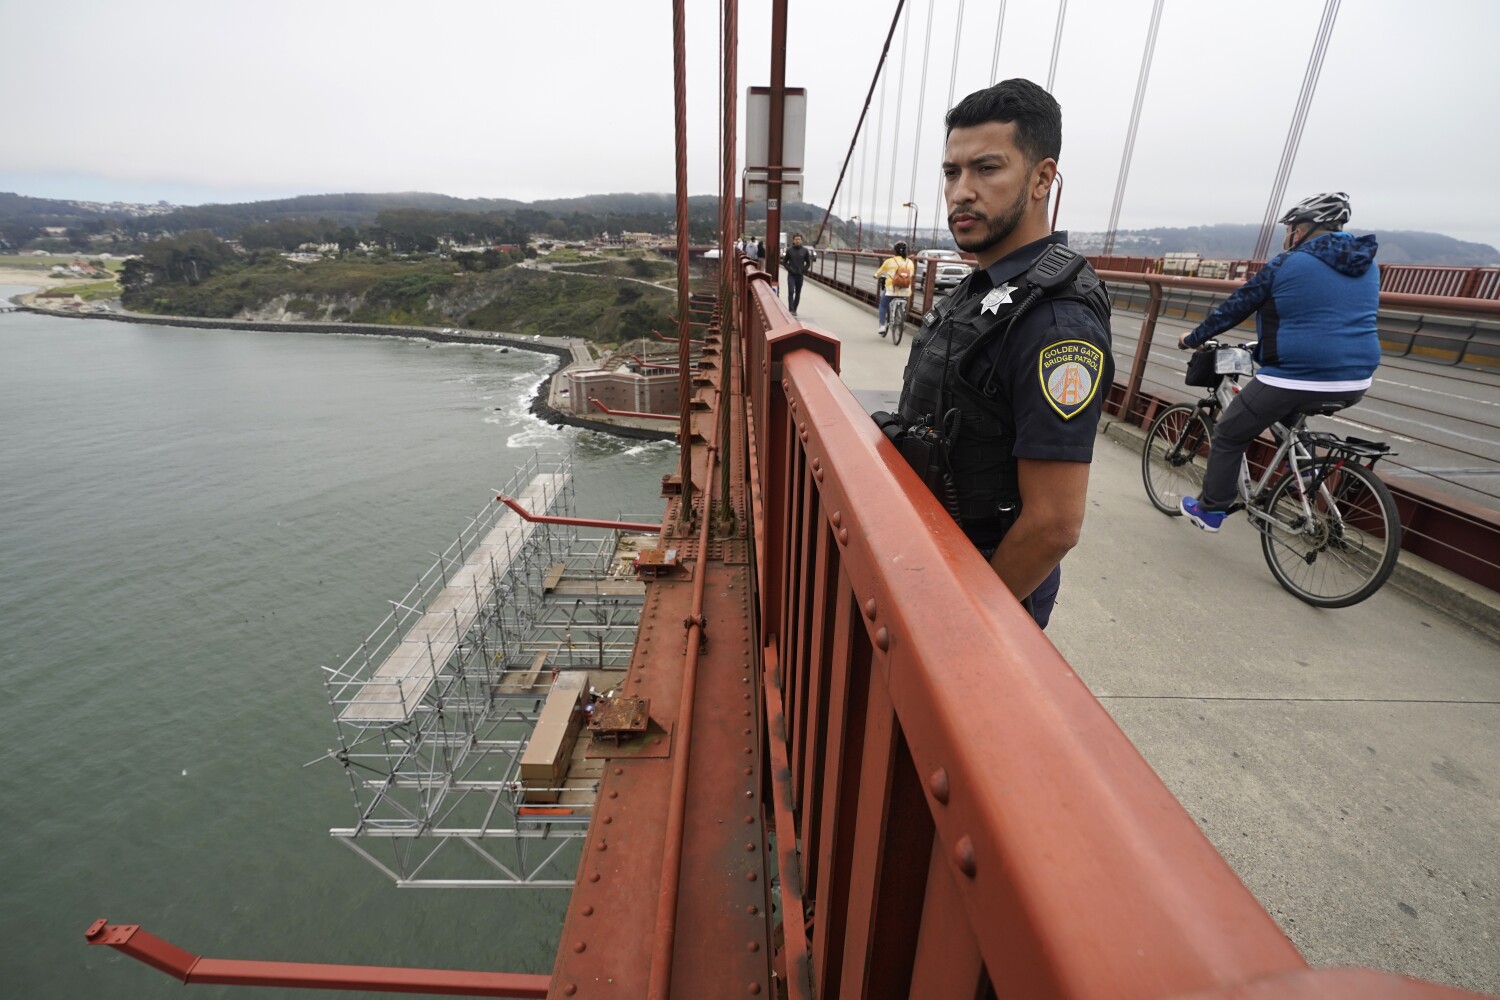 First responders get new training tool to save people who jump from Golden Gate Bridge